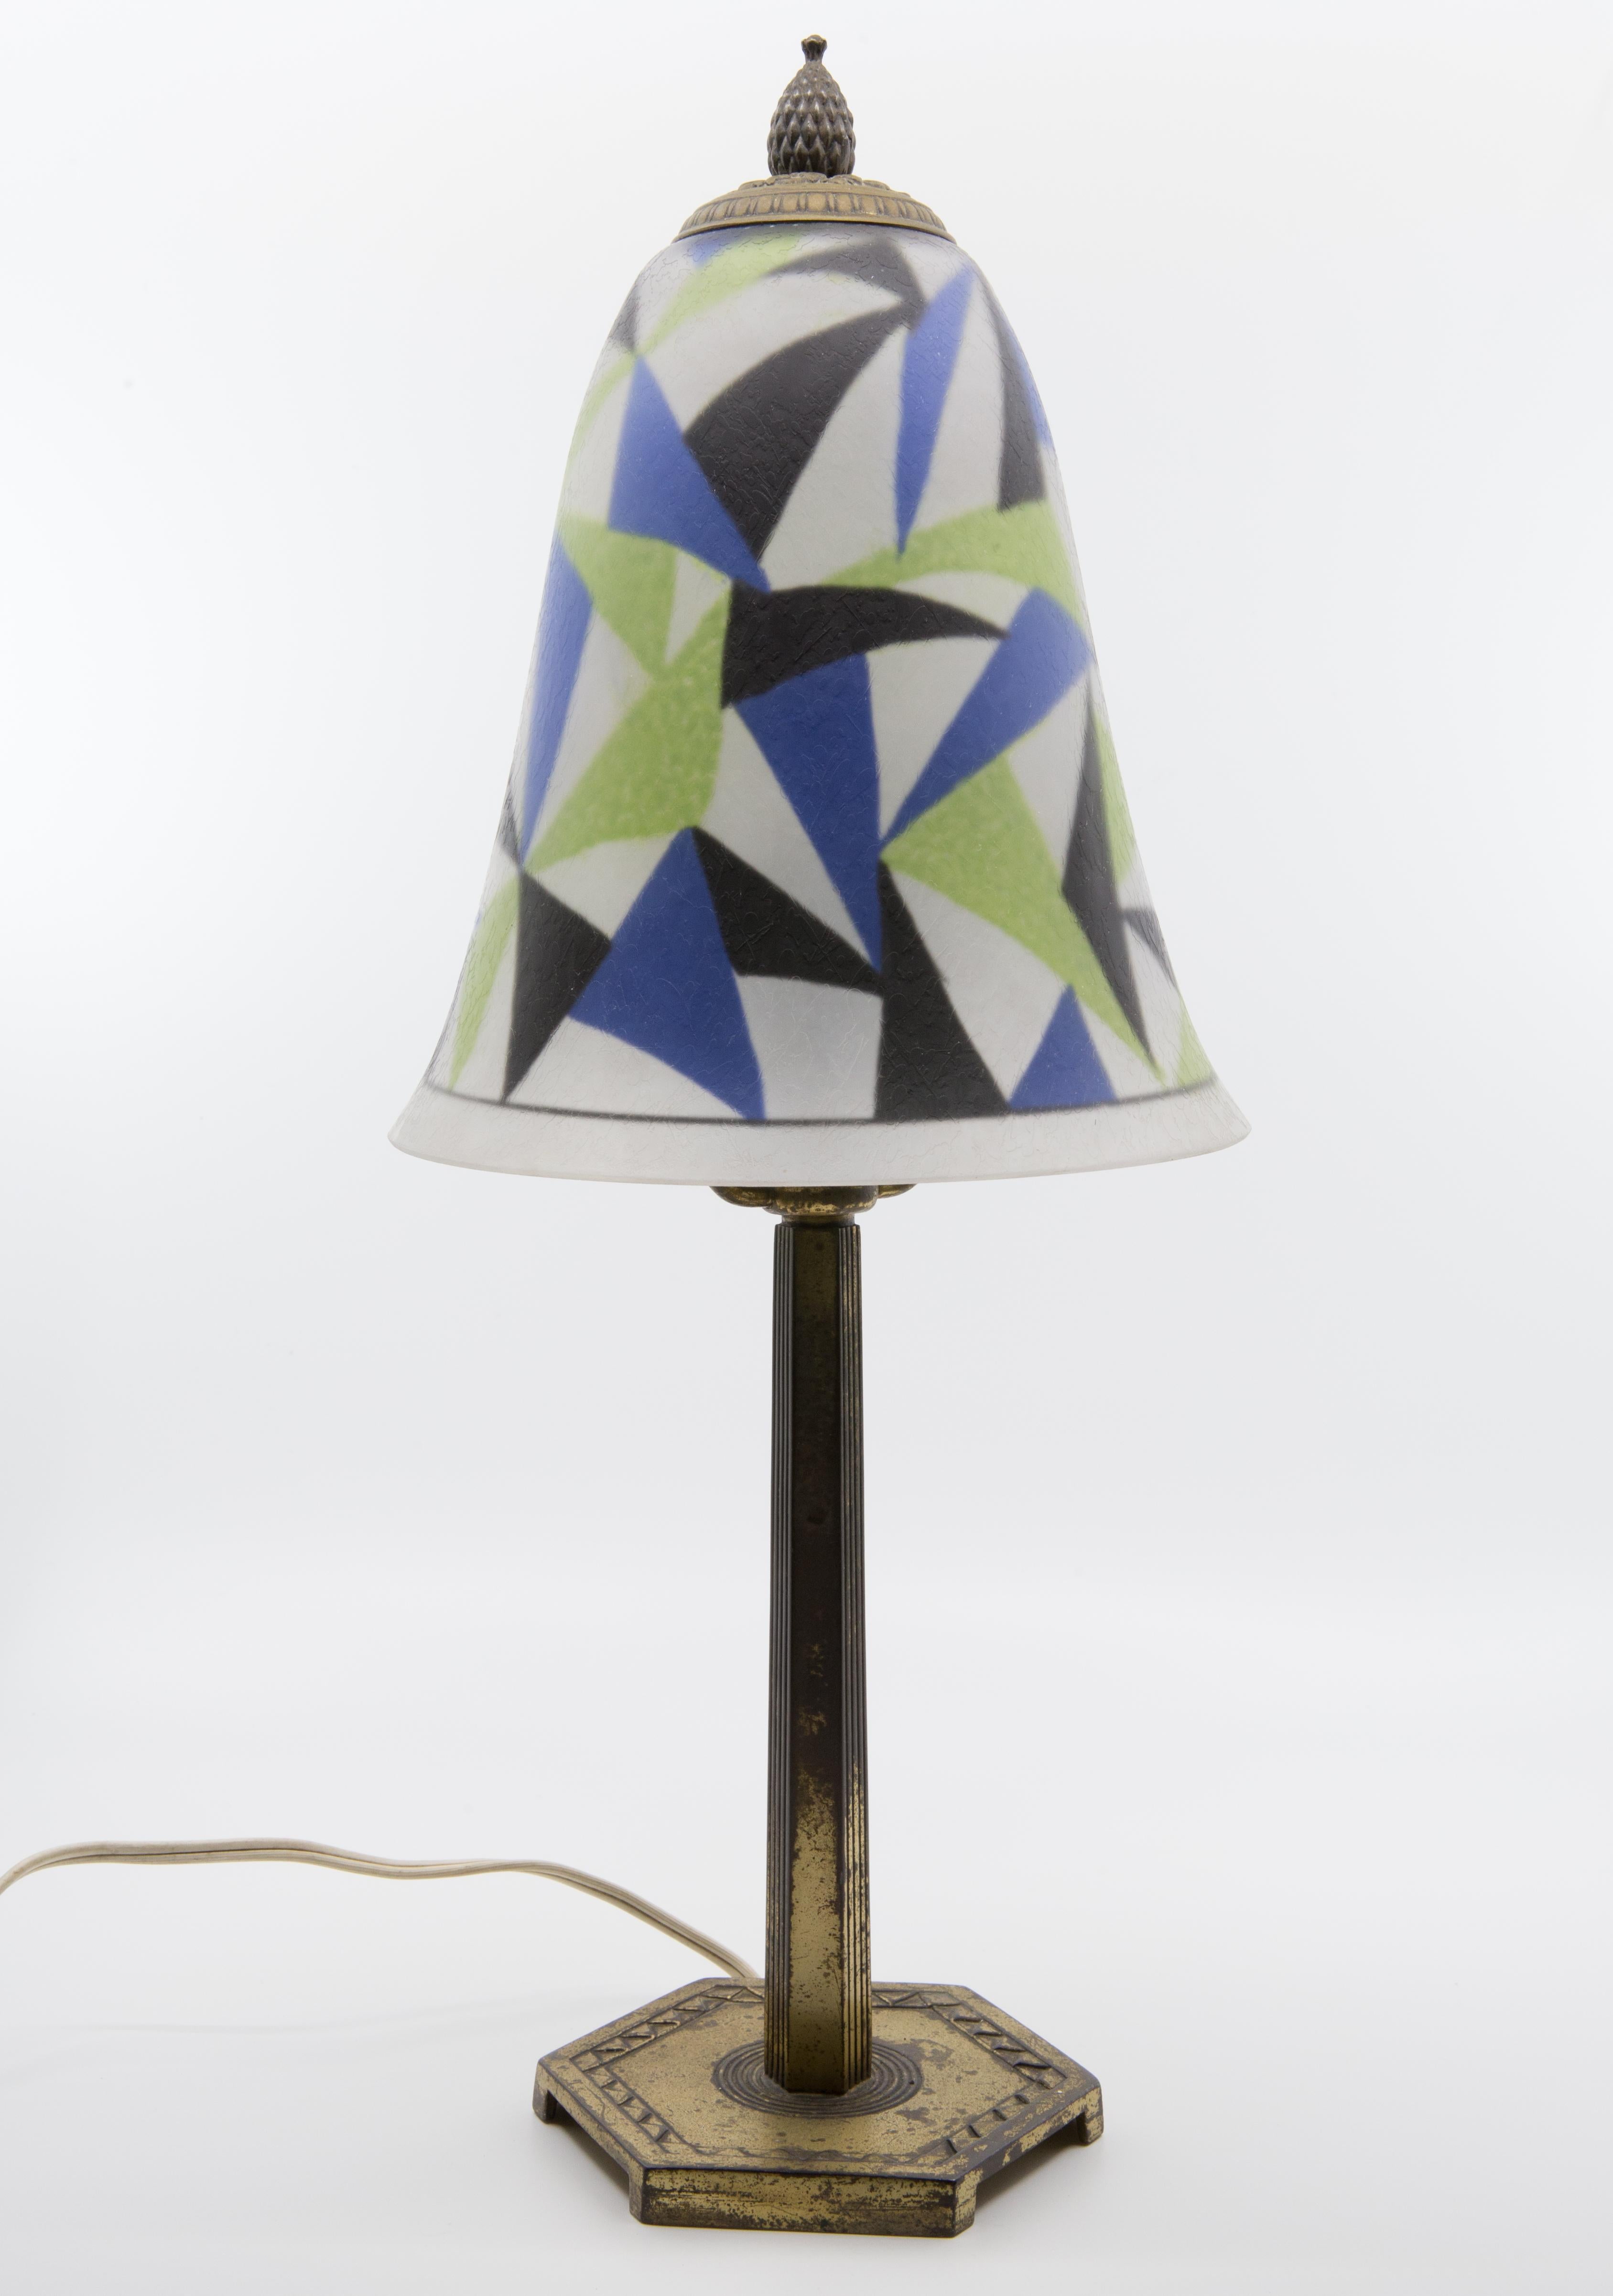 Etched Pairpoint Art Deco Reverse Painted Signed Desk Lamp, circa 1925